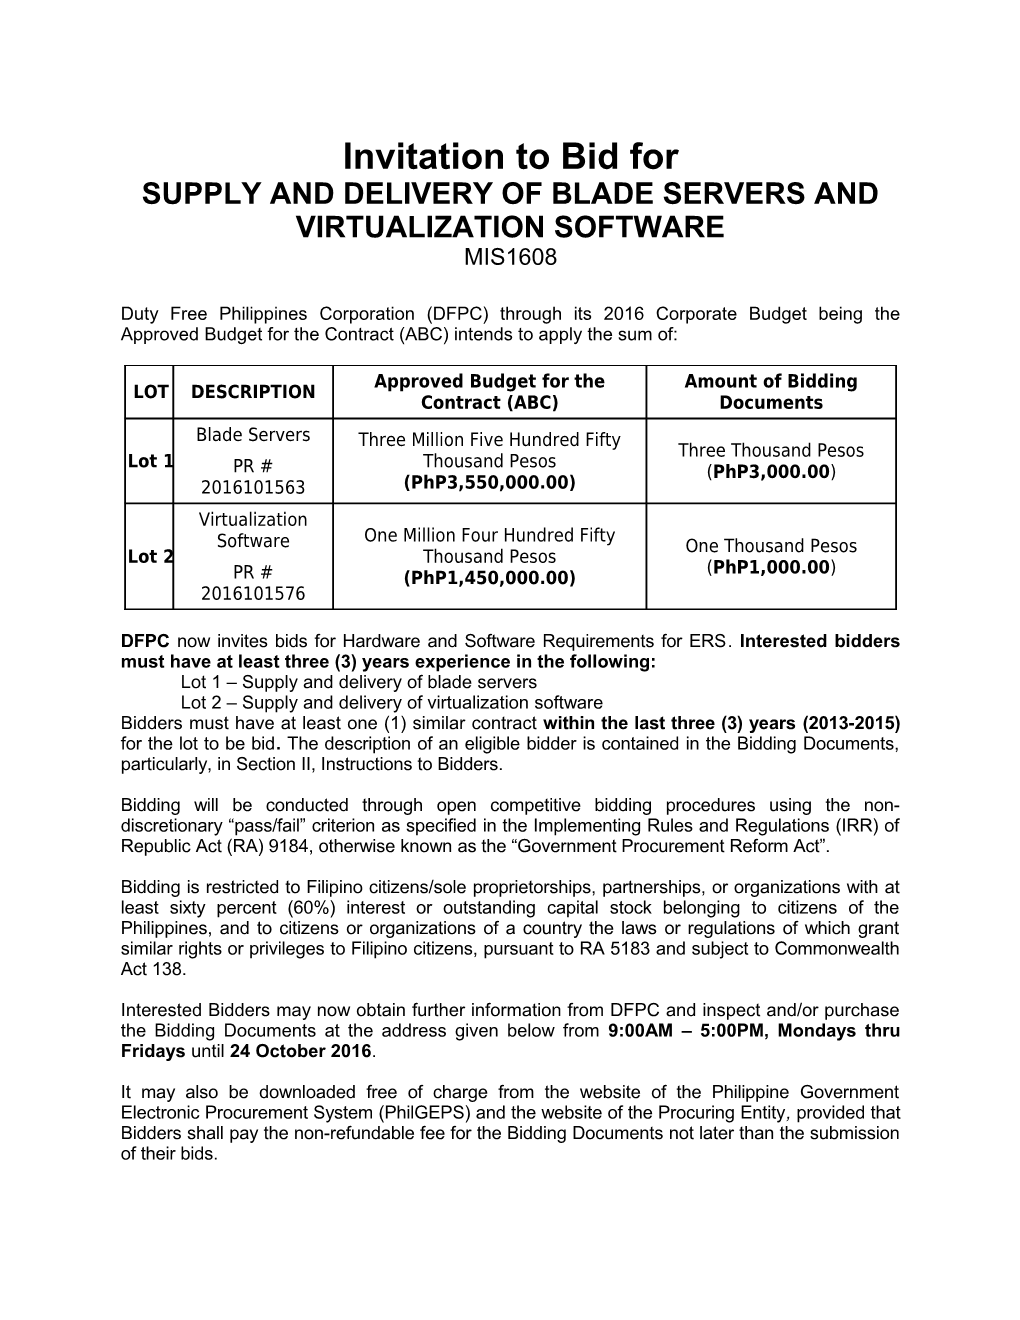 Supply and Delivery of Blade Servers and Virtualization Software